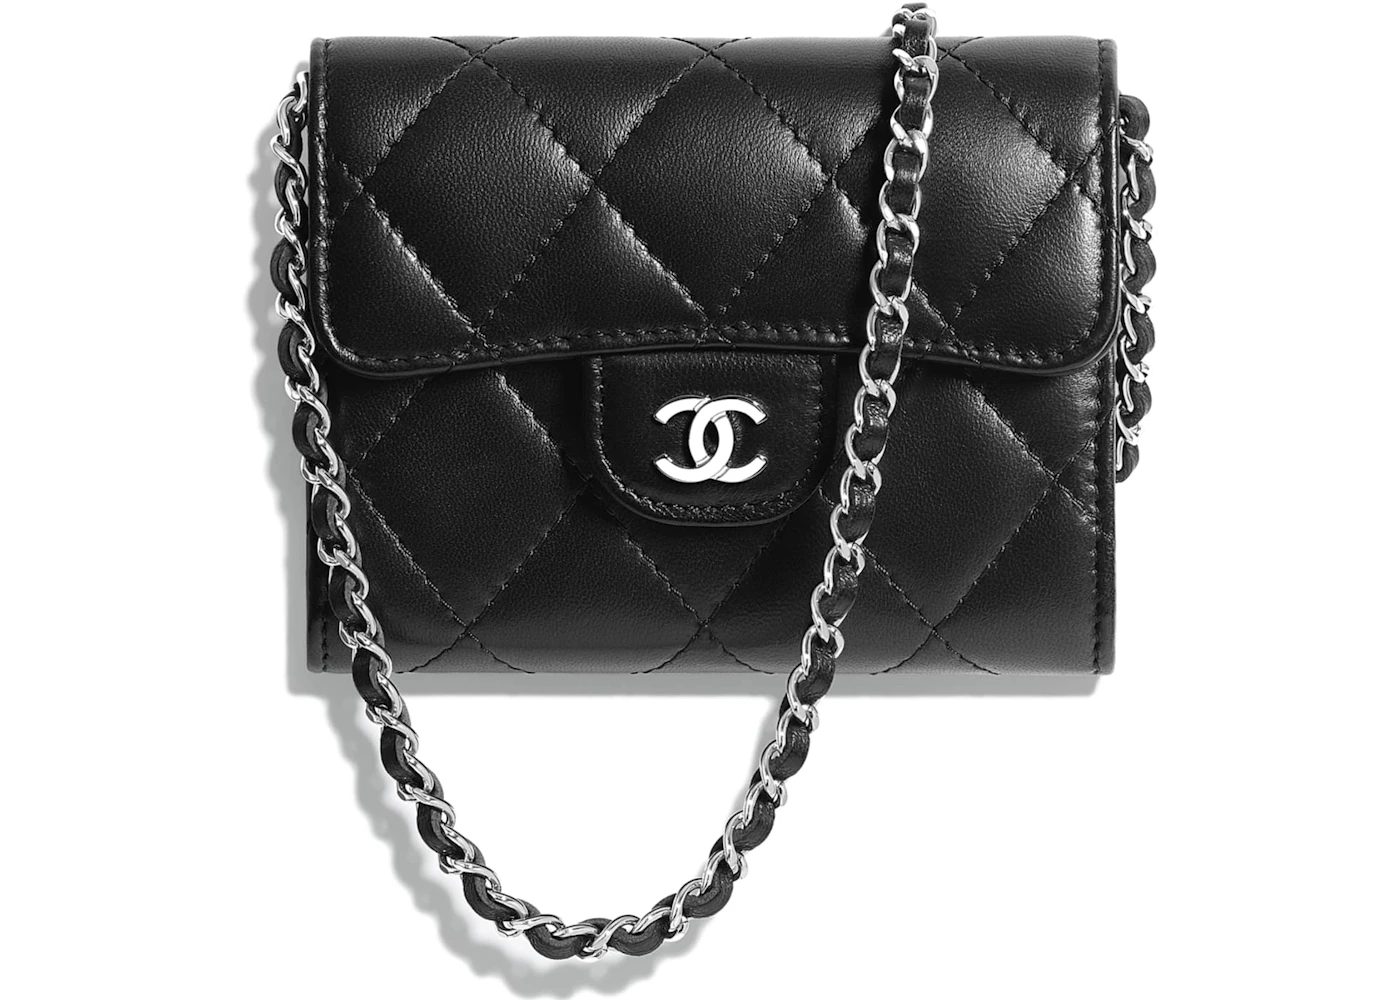 silver chanel wallet on chain black